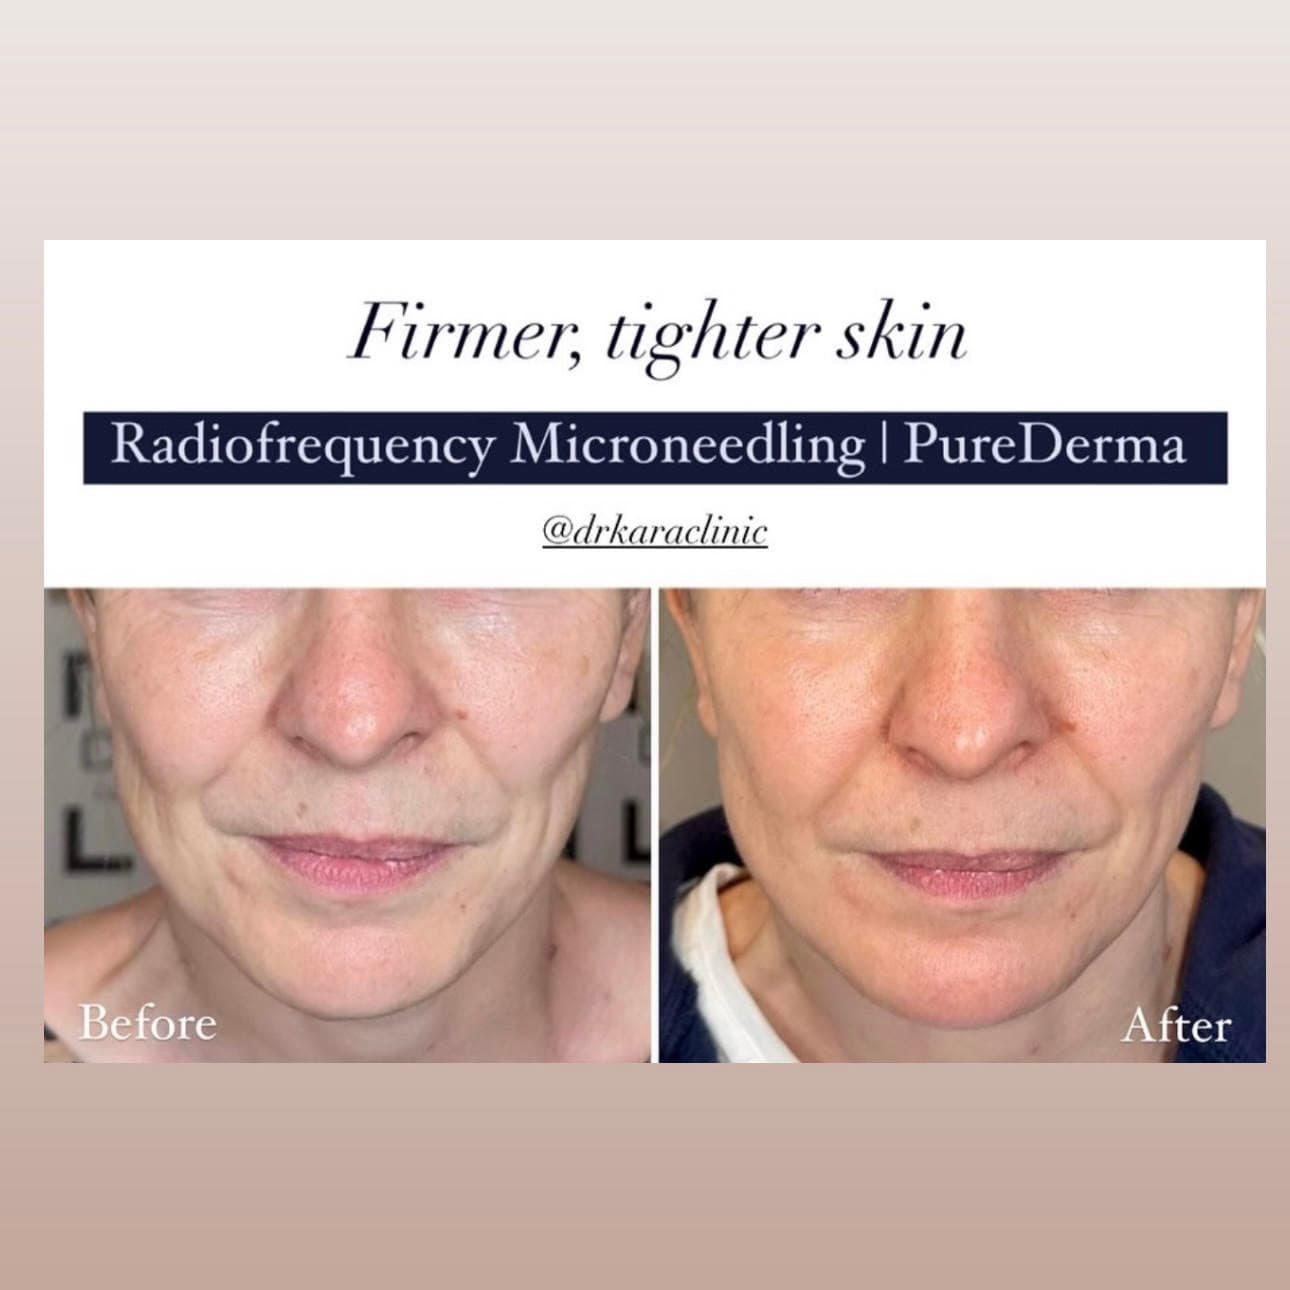 Radiofrequency microneedling face result in Norwich,Norfolk, UK by PureDerma